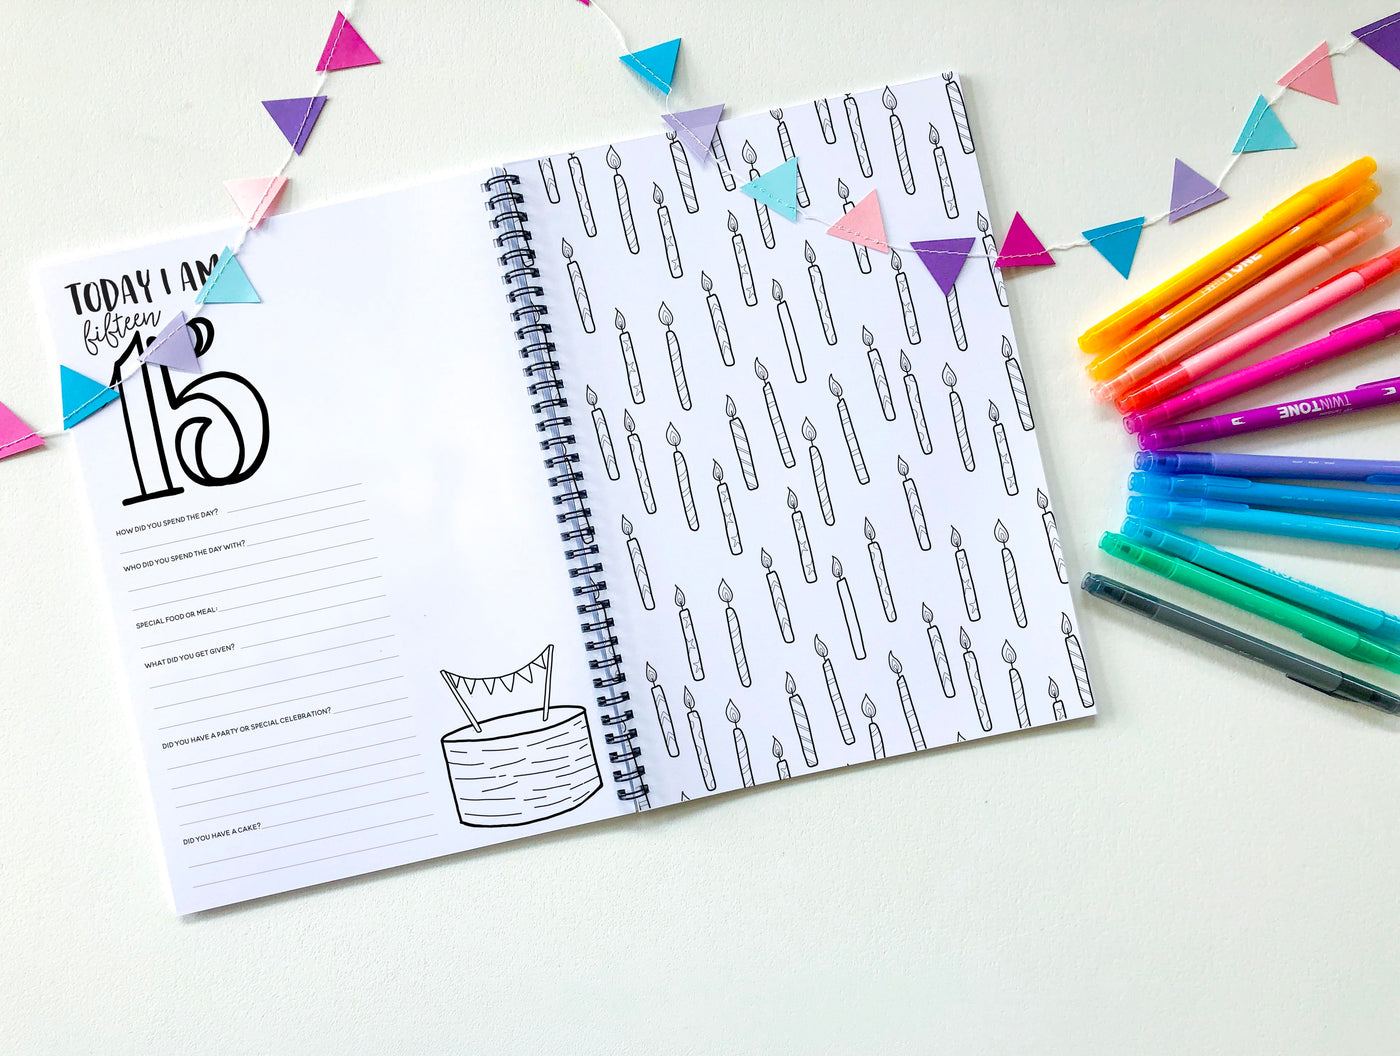 Birthday Memory Book | 18 birthdays with your tiny VIP | Blueberry Co |The birthday memory book to document the first 18  years with your growing tiny VIP